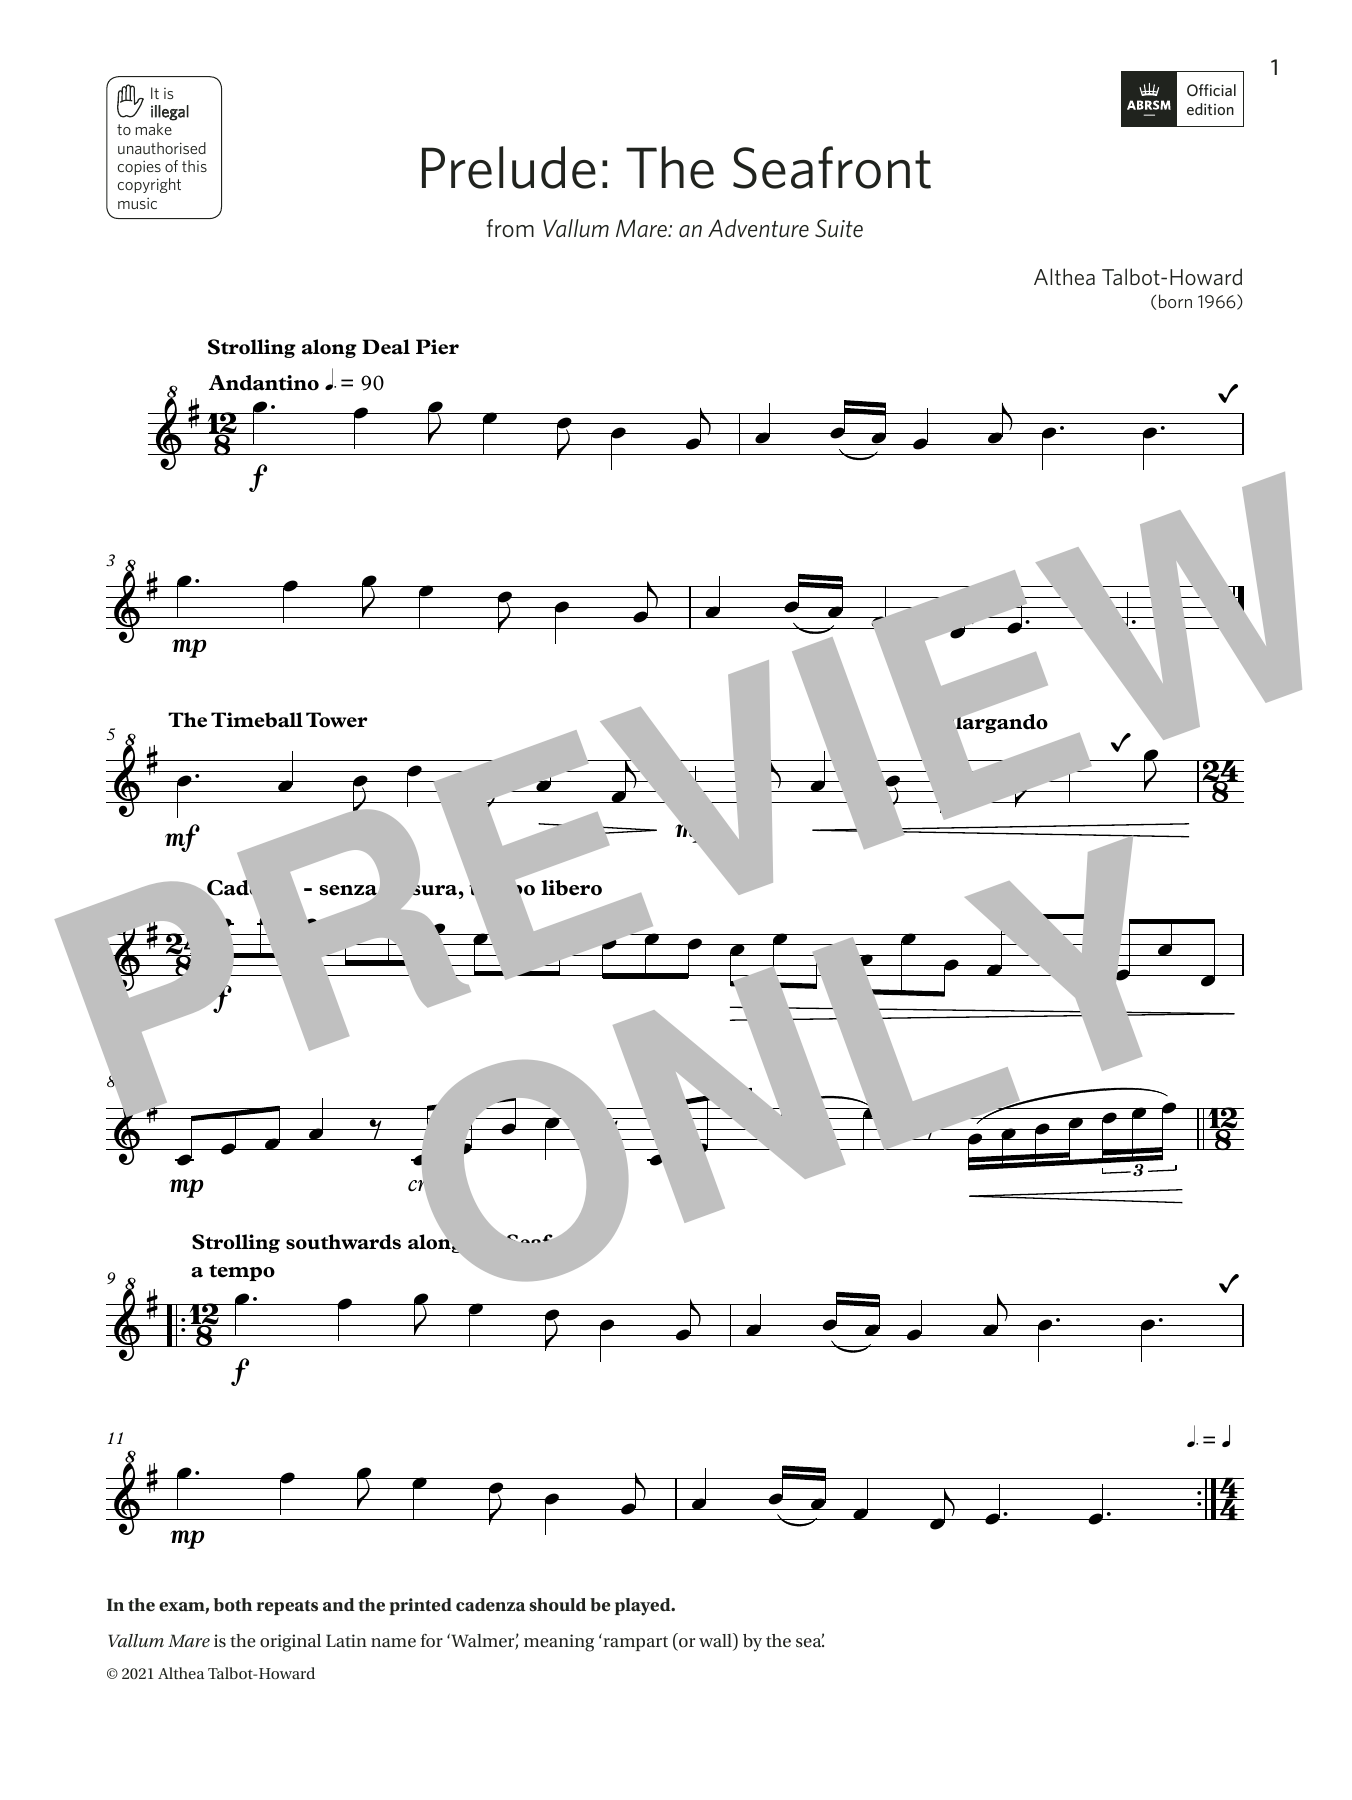 Download Althea Talbot-Howard Prelude: The Seafront (Grade 5 List B8 Sheet Music